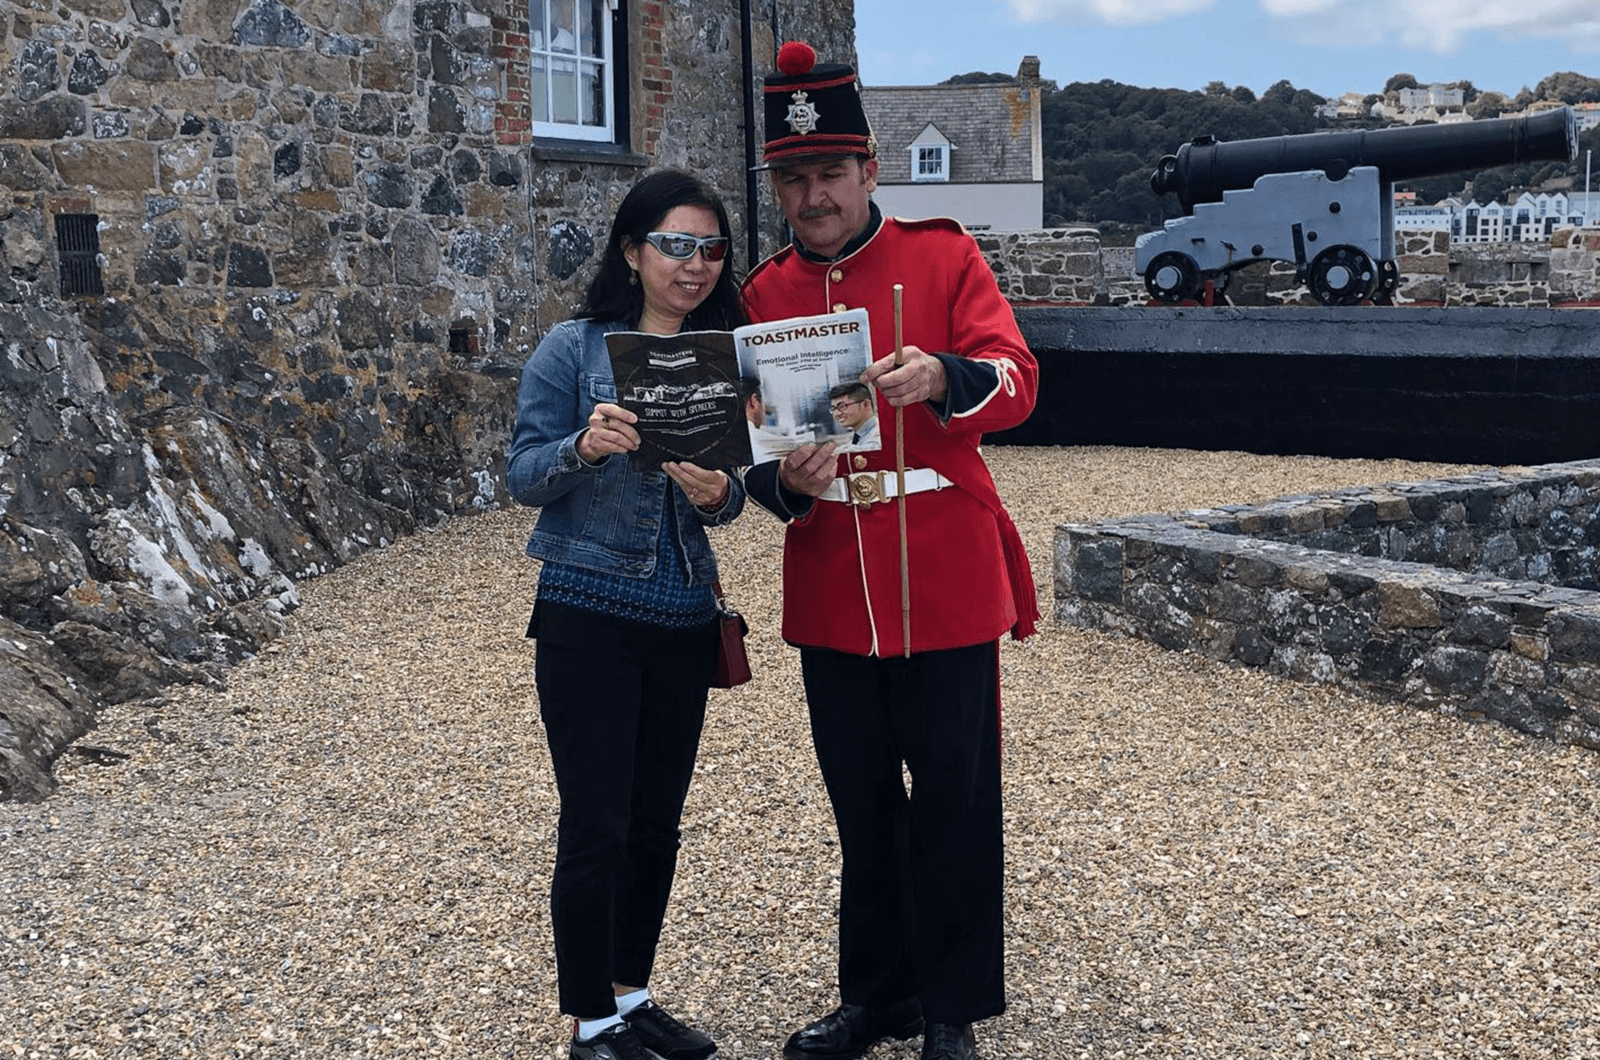 Lisa Yang of Orlando, Florida, reads the Toastmaster with an actor in the gun show at the Castle Cornet in Saint Peter Port part of Guernsey, Channel Islands.